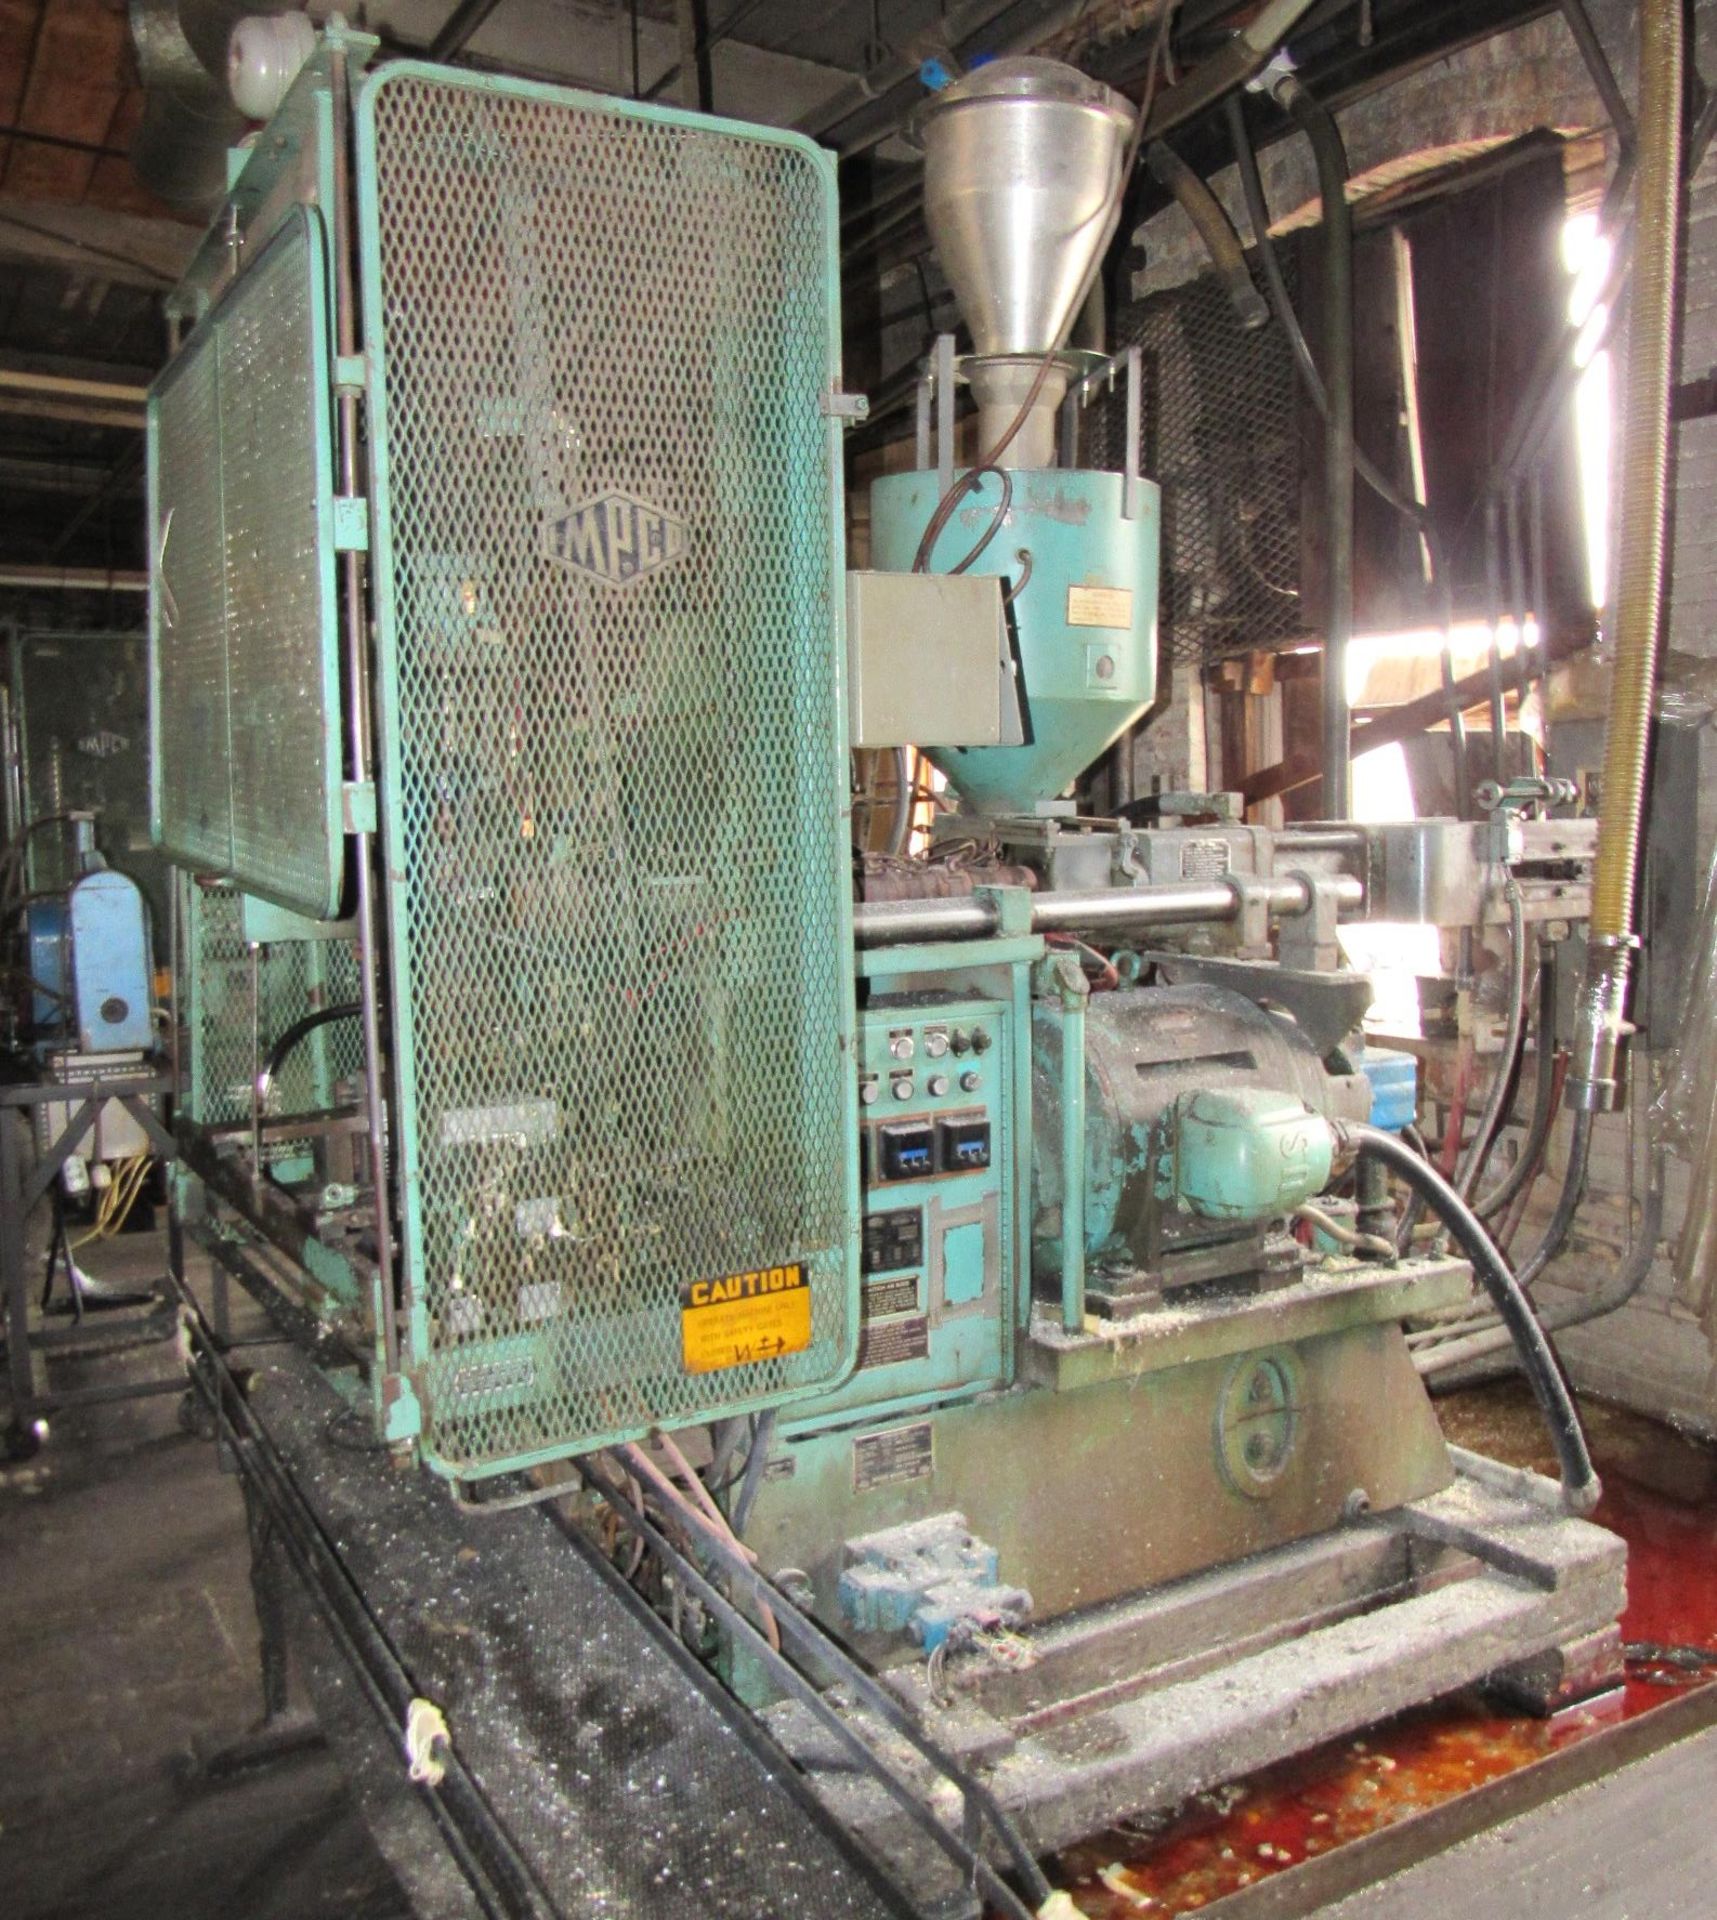 Impco Mod.B13-R25 Blow Molder - S/N M897-67, Complete with Up-Dated Controls, AC Motor